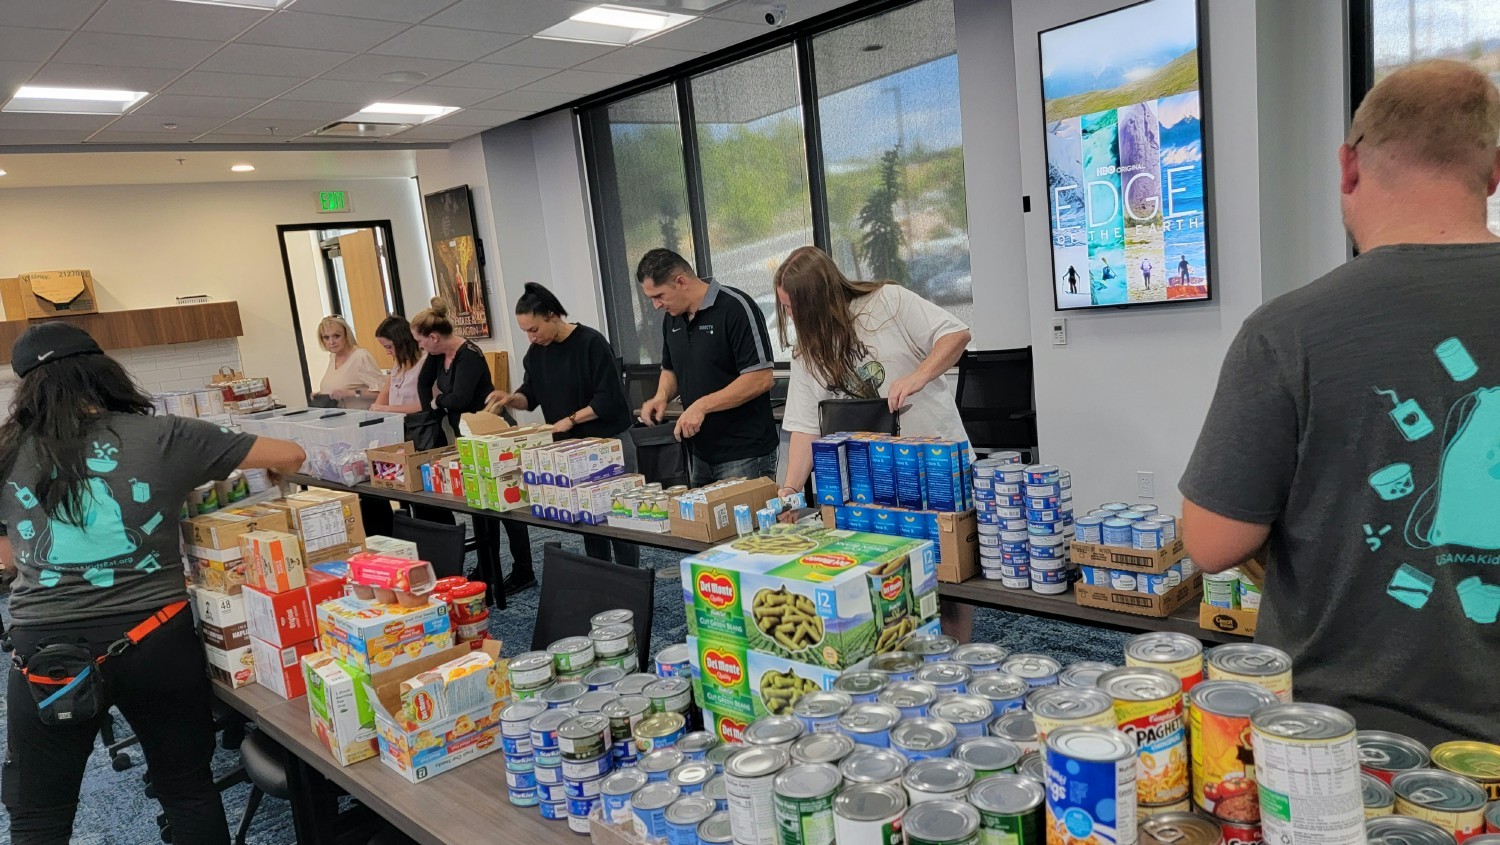 Together with USANA Kids Eats, Groove employees donated and package over 3500 items of food.